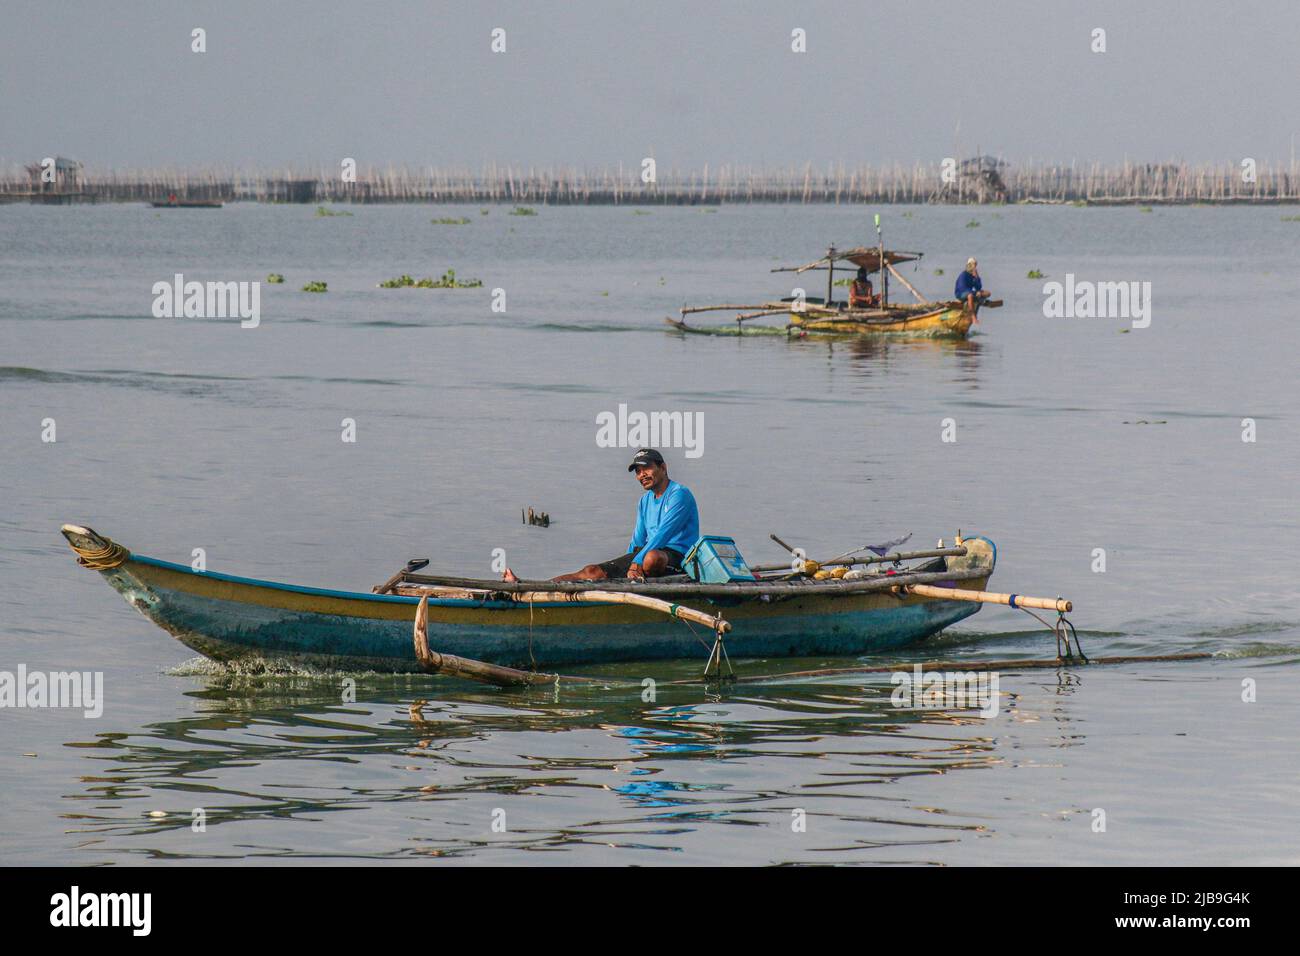 Binangonan, Philippines. 04th June, 2022. Several boats are seen rowing in the lake. Laguna Lake is the largest lake in the Philippines, covering a surface of 900 square kilometers or equivalent to 90,000 hectares. Its water runs from Laguna Province all the way to the Province of Rizal, the southern part of Luzon. The lake provides resources like transportation, recreation, livelihood, and most importantly food for the surrounding communities. Laguna Lake is classified as Class C freshwater which has the capability to grow fish and other aquatic resources. Some watershed near Metro Manila cla Stock Photo